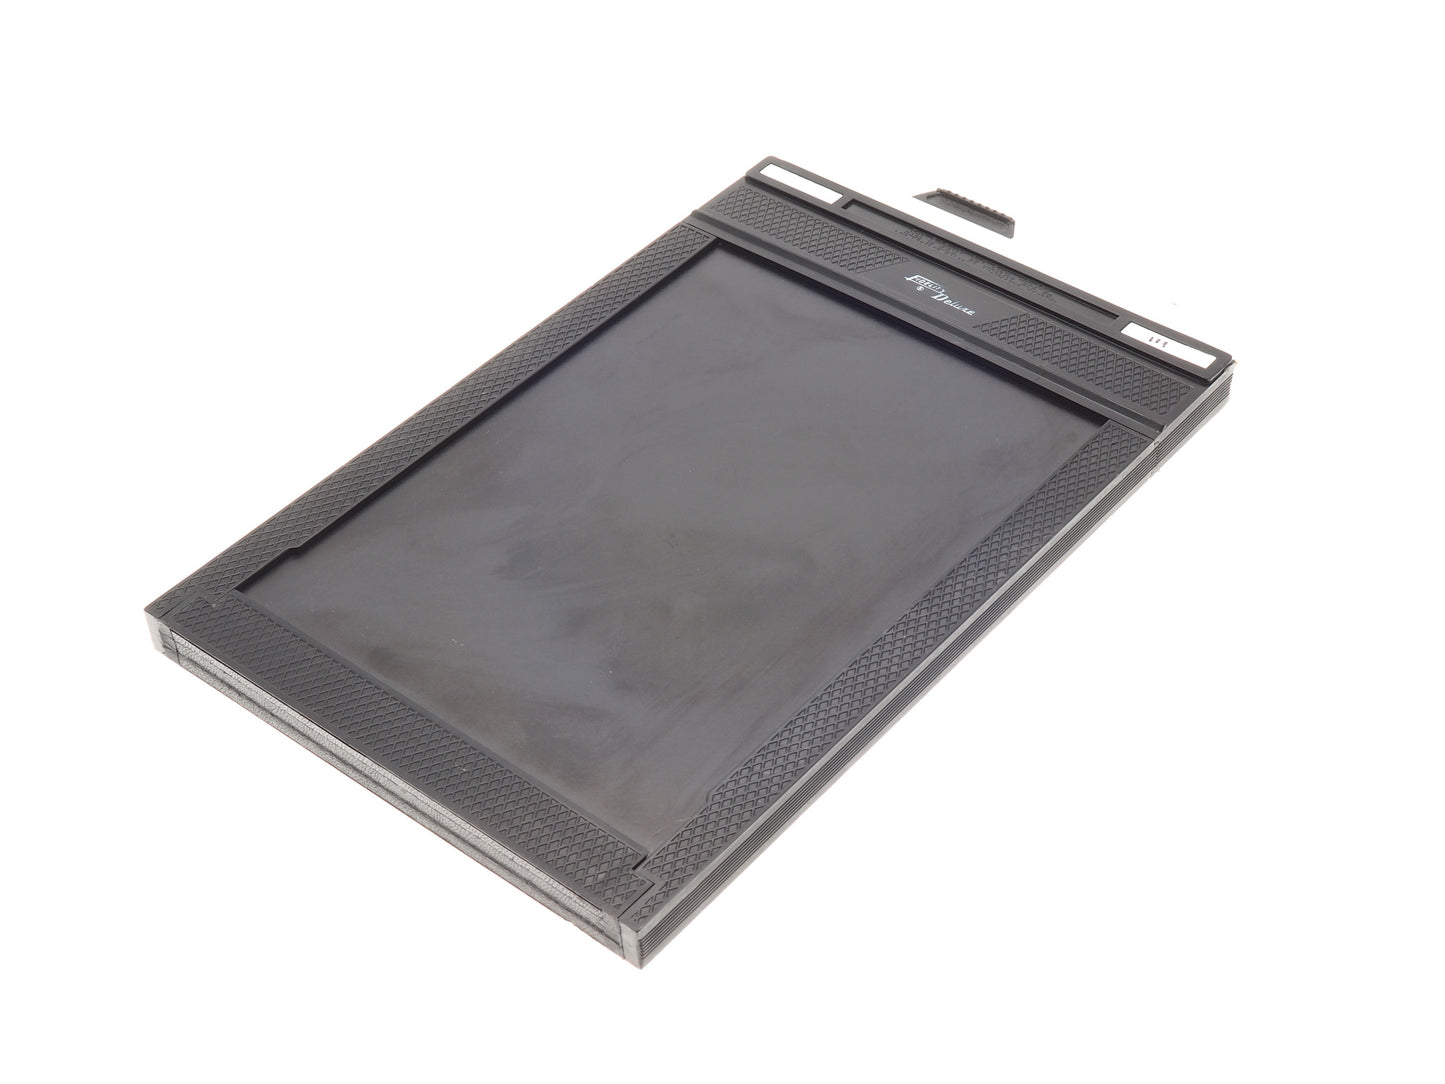 Fidelity Deluxe 5x7" Cut Film Holder - Accessory